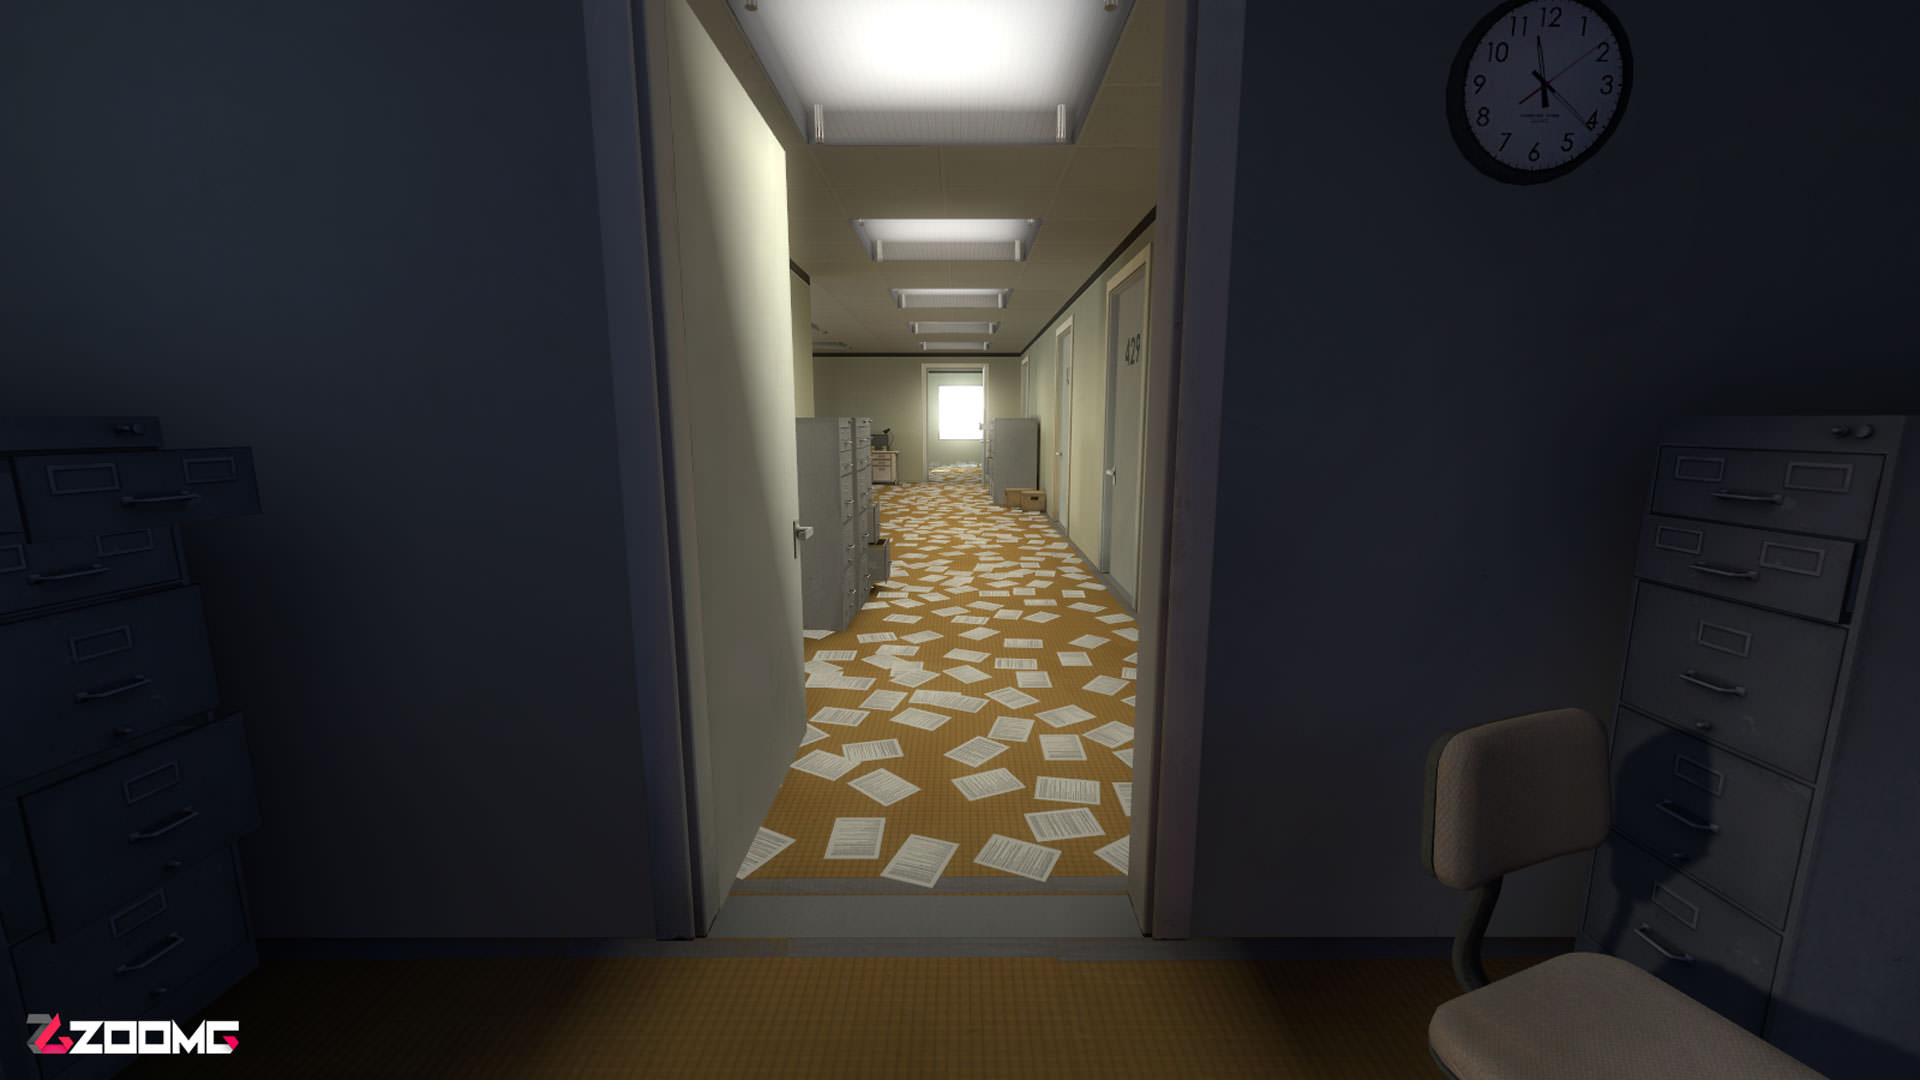 The Stanley Parable Zoomg